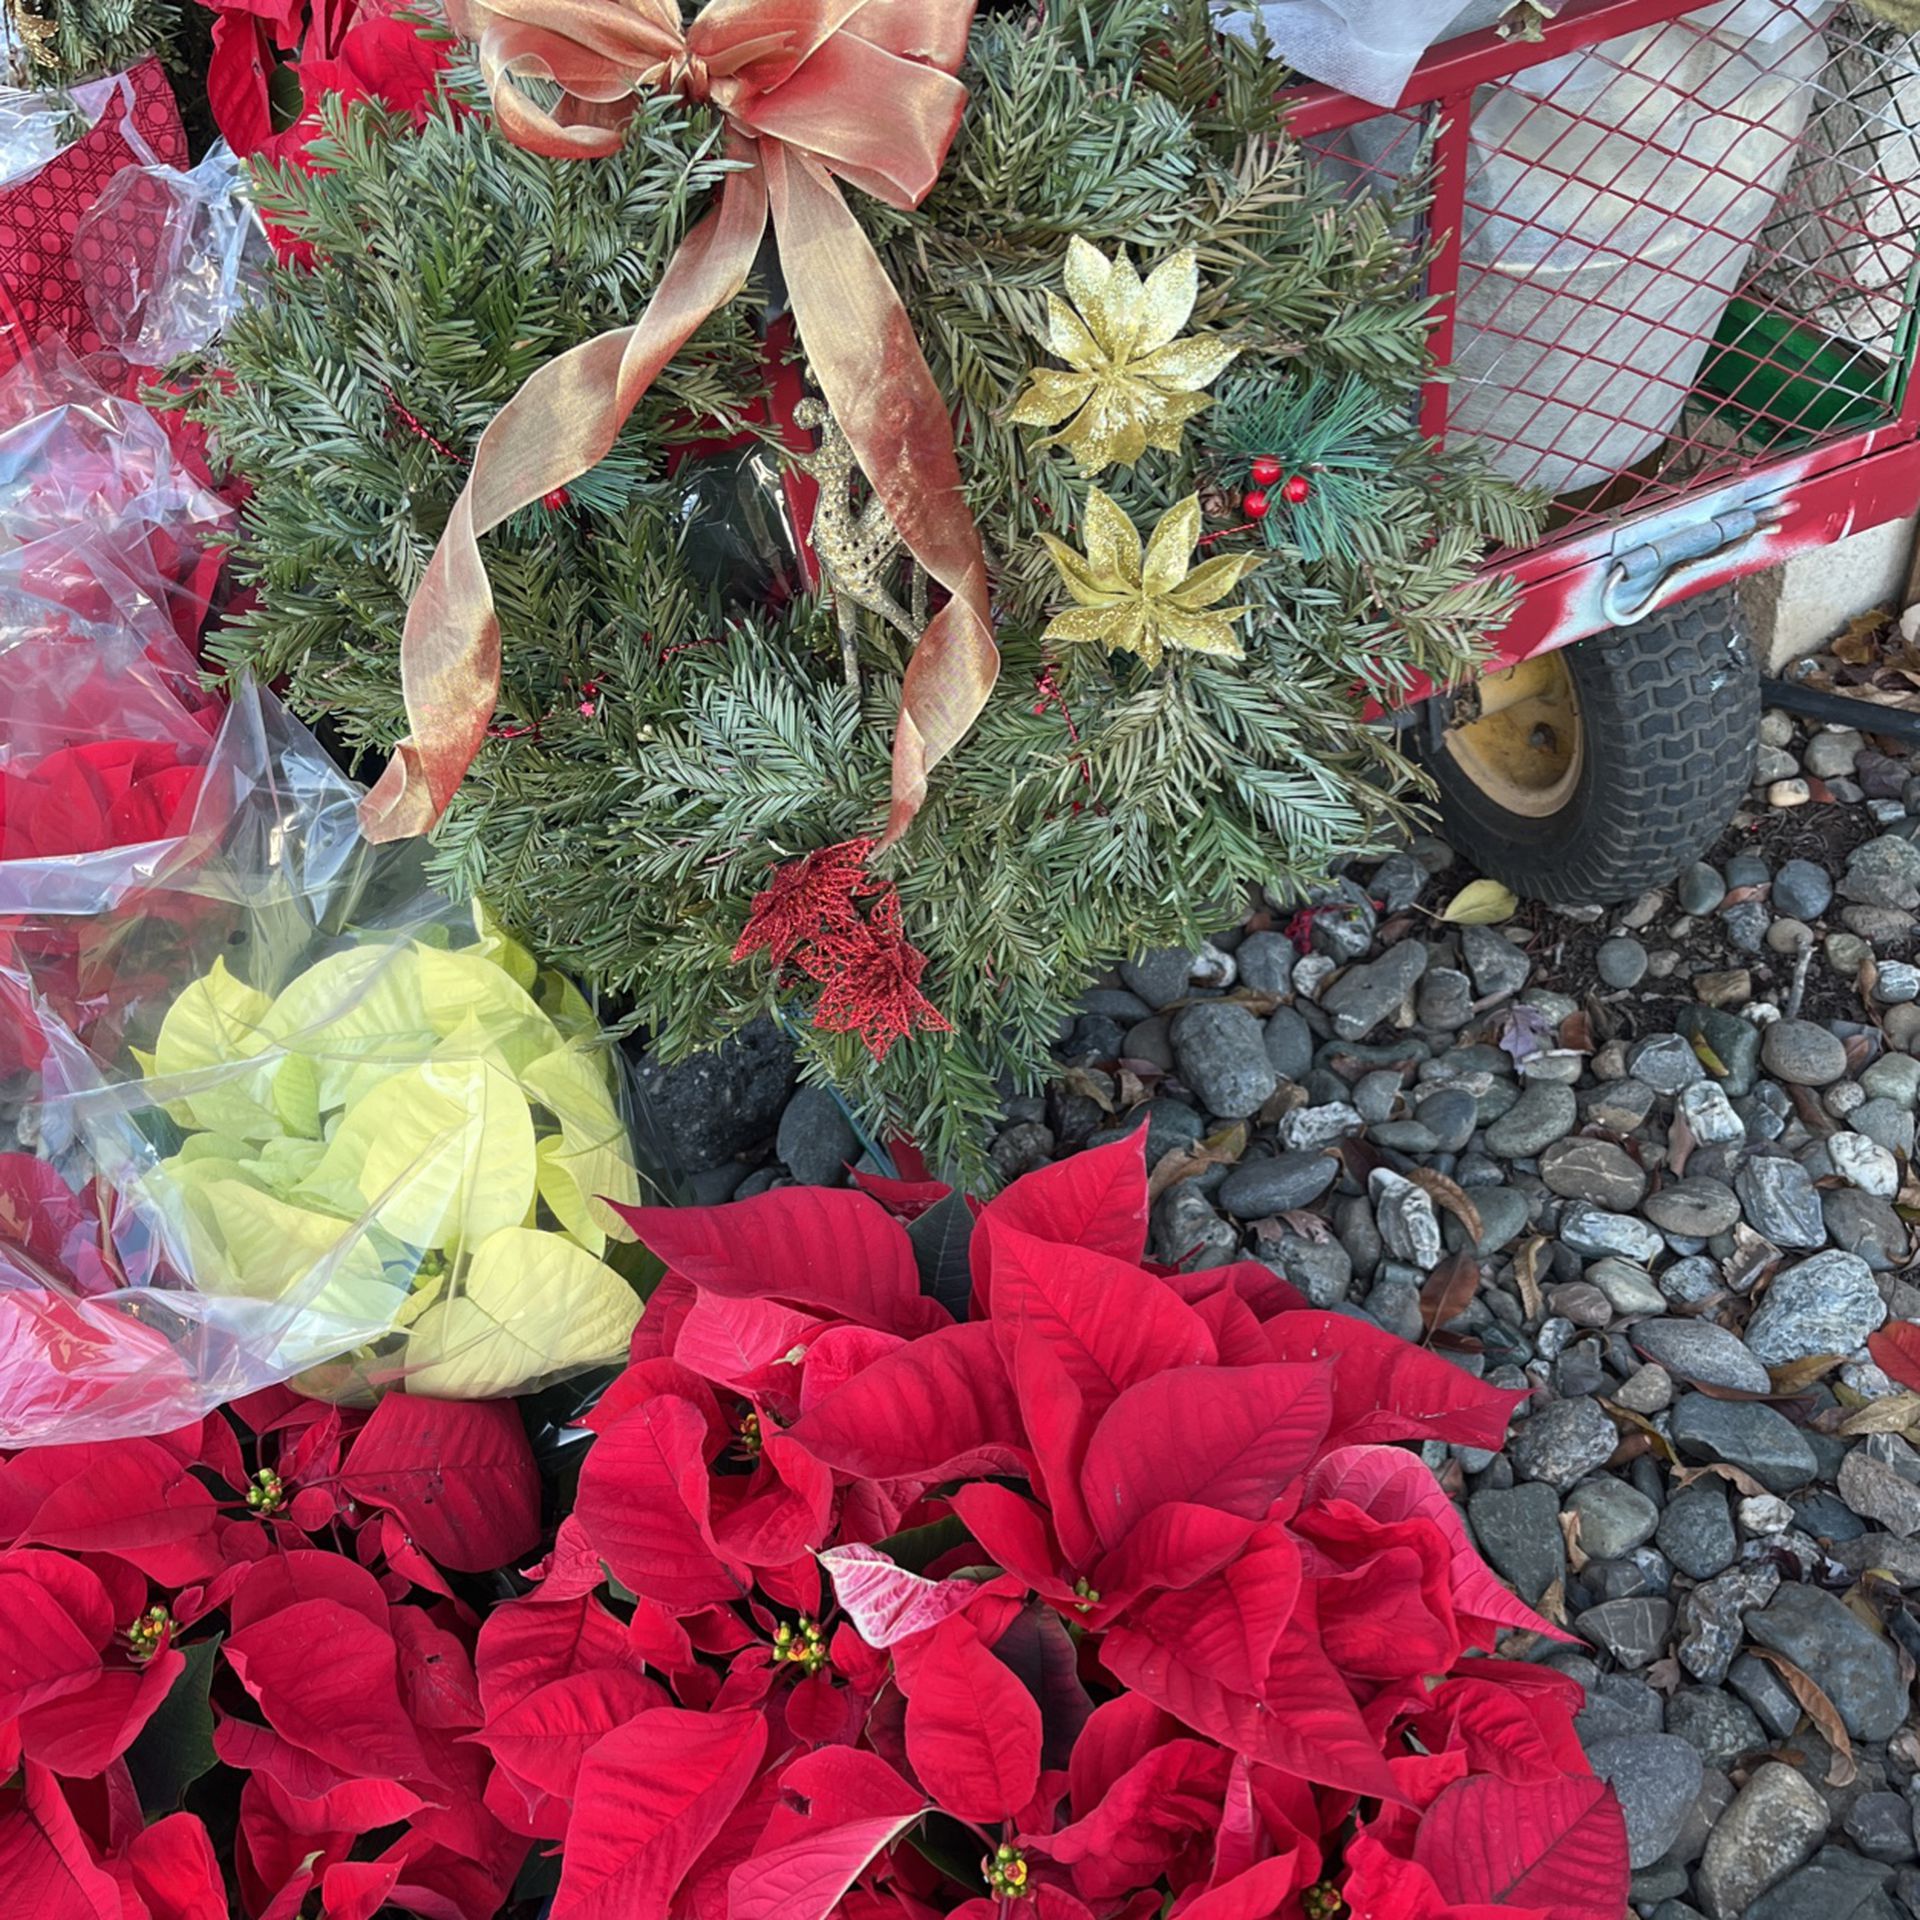 Wreathes Handmade and Poinsettis